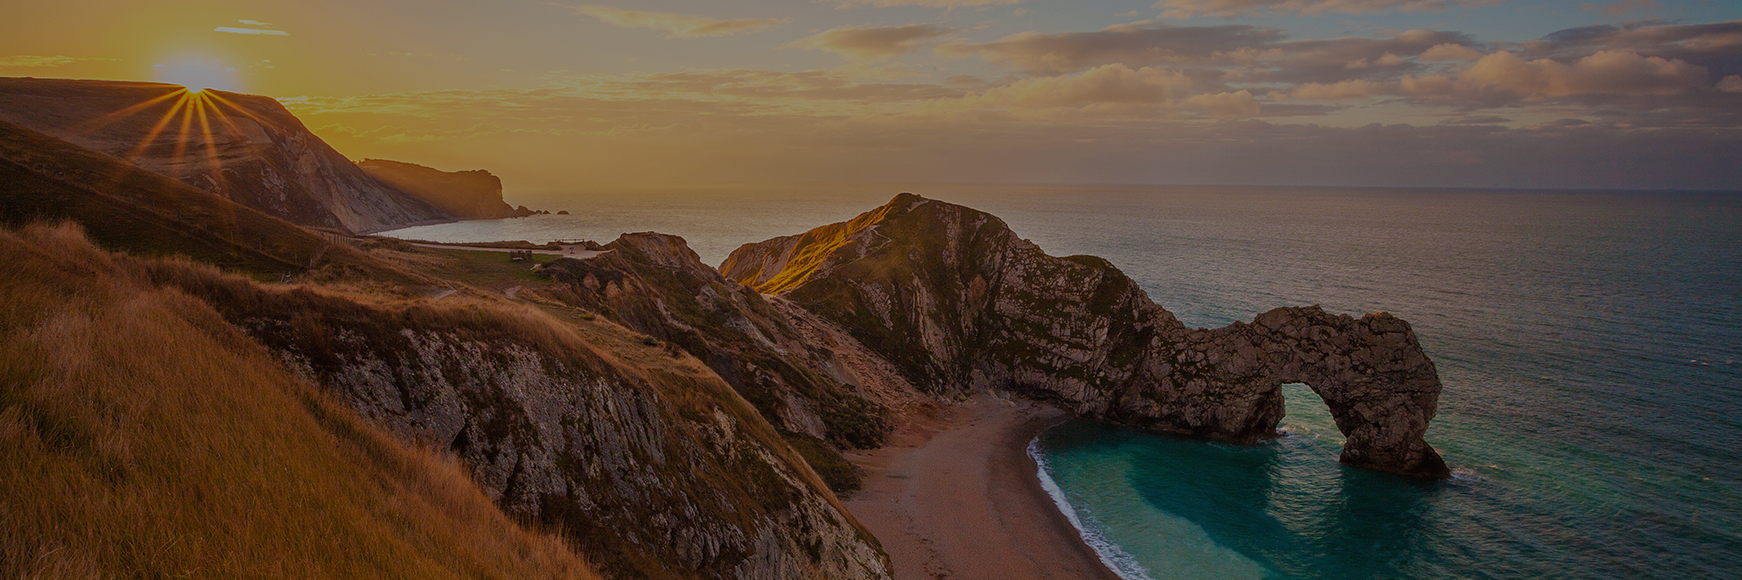 10 of the best geological features to see on the Jurassic Coast banner image